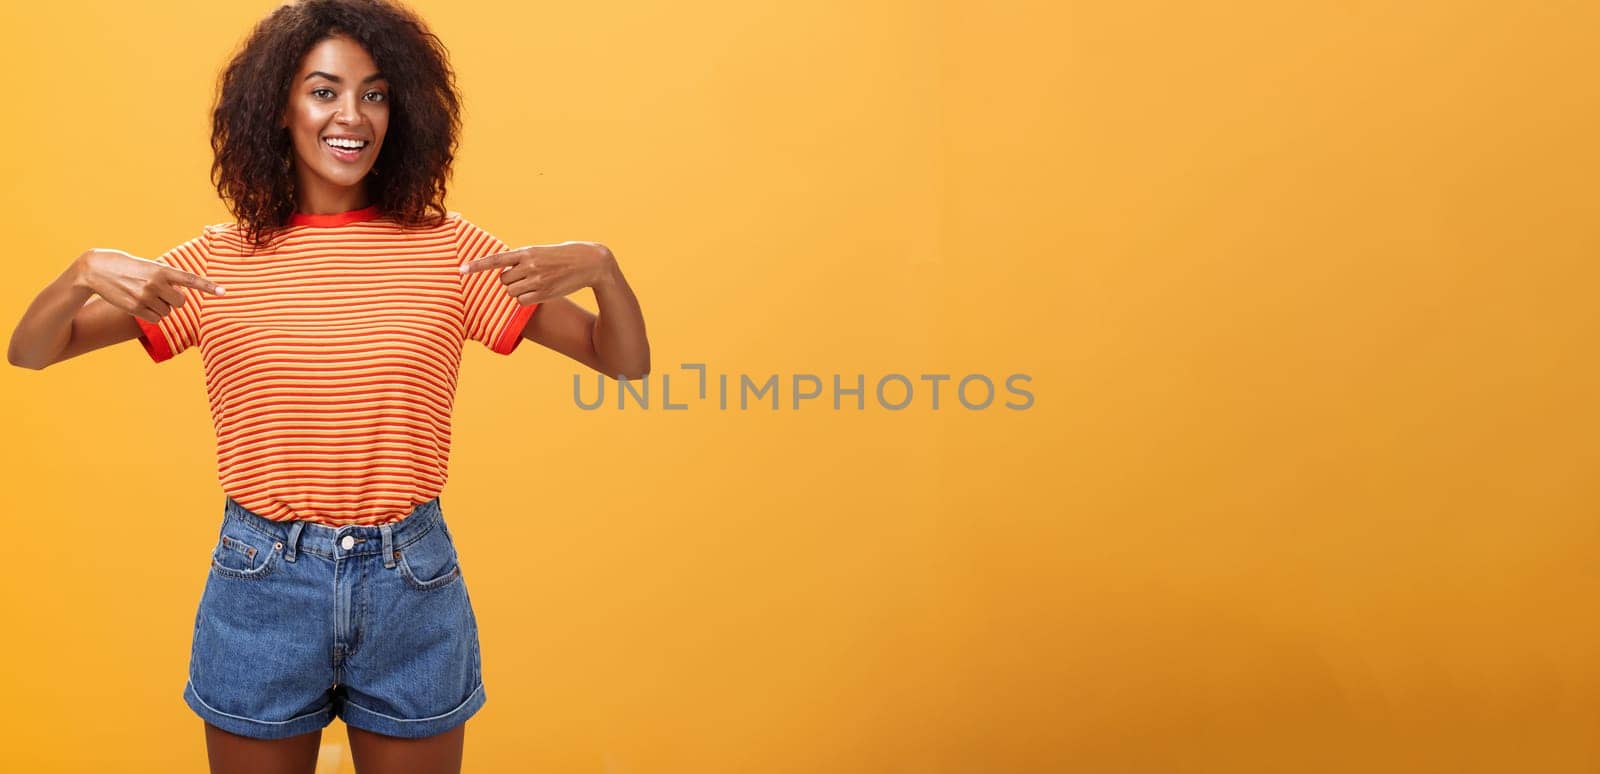 Hey pick me I your girl looking for. Portrait of charming friendly-looking ambitious dark-skinned female with afro hairstyle pointing at chest proudly and joyful posing against orange background.